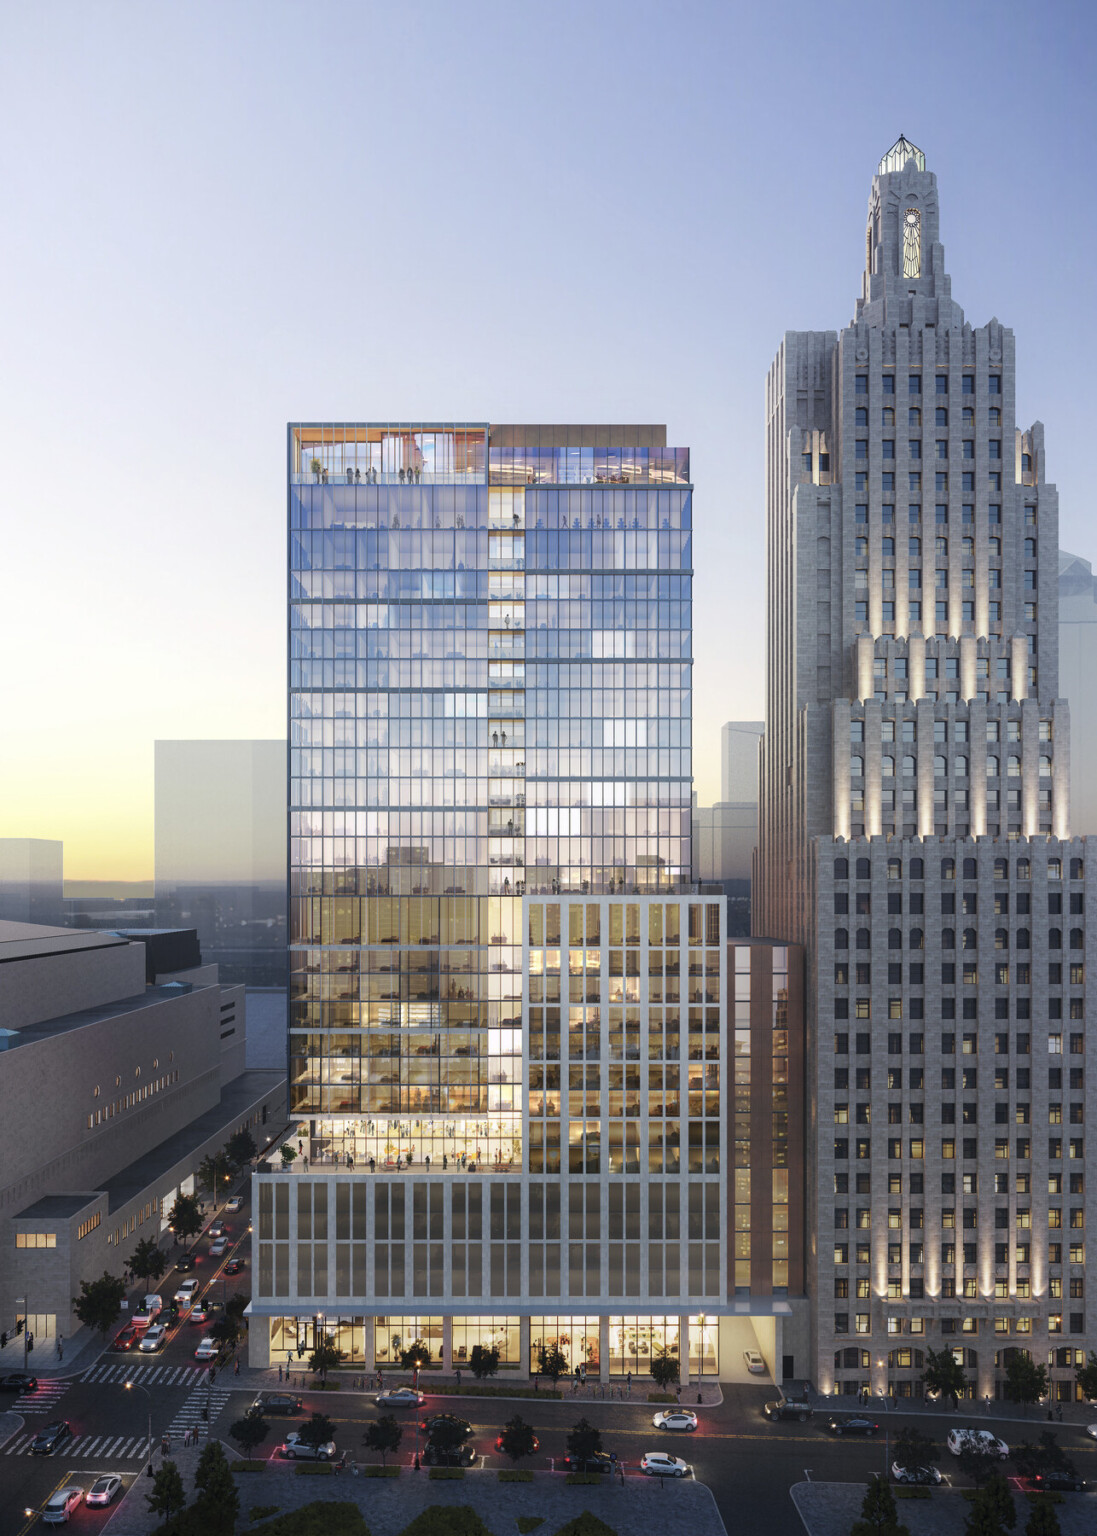 27-story mixed-use high-rise clad in limestone-colored panels and glass façade